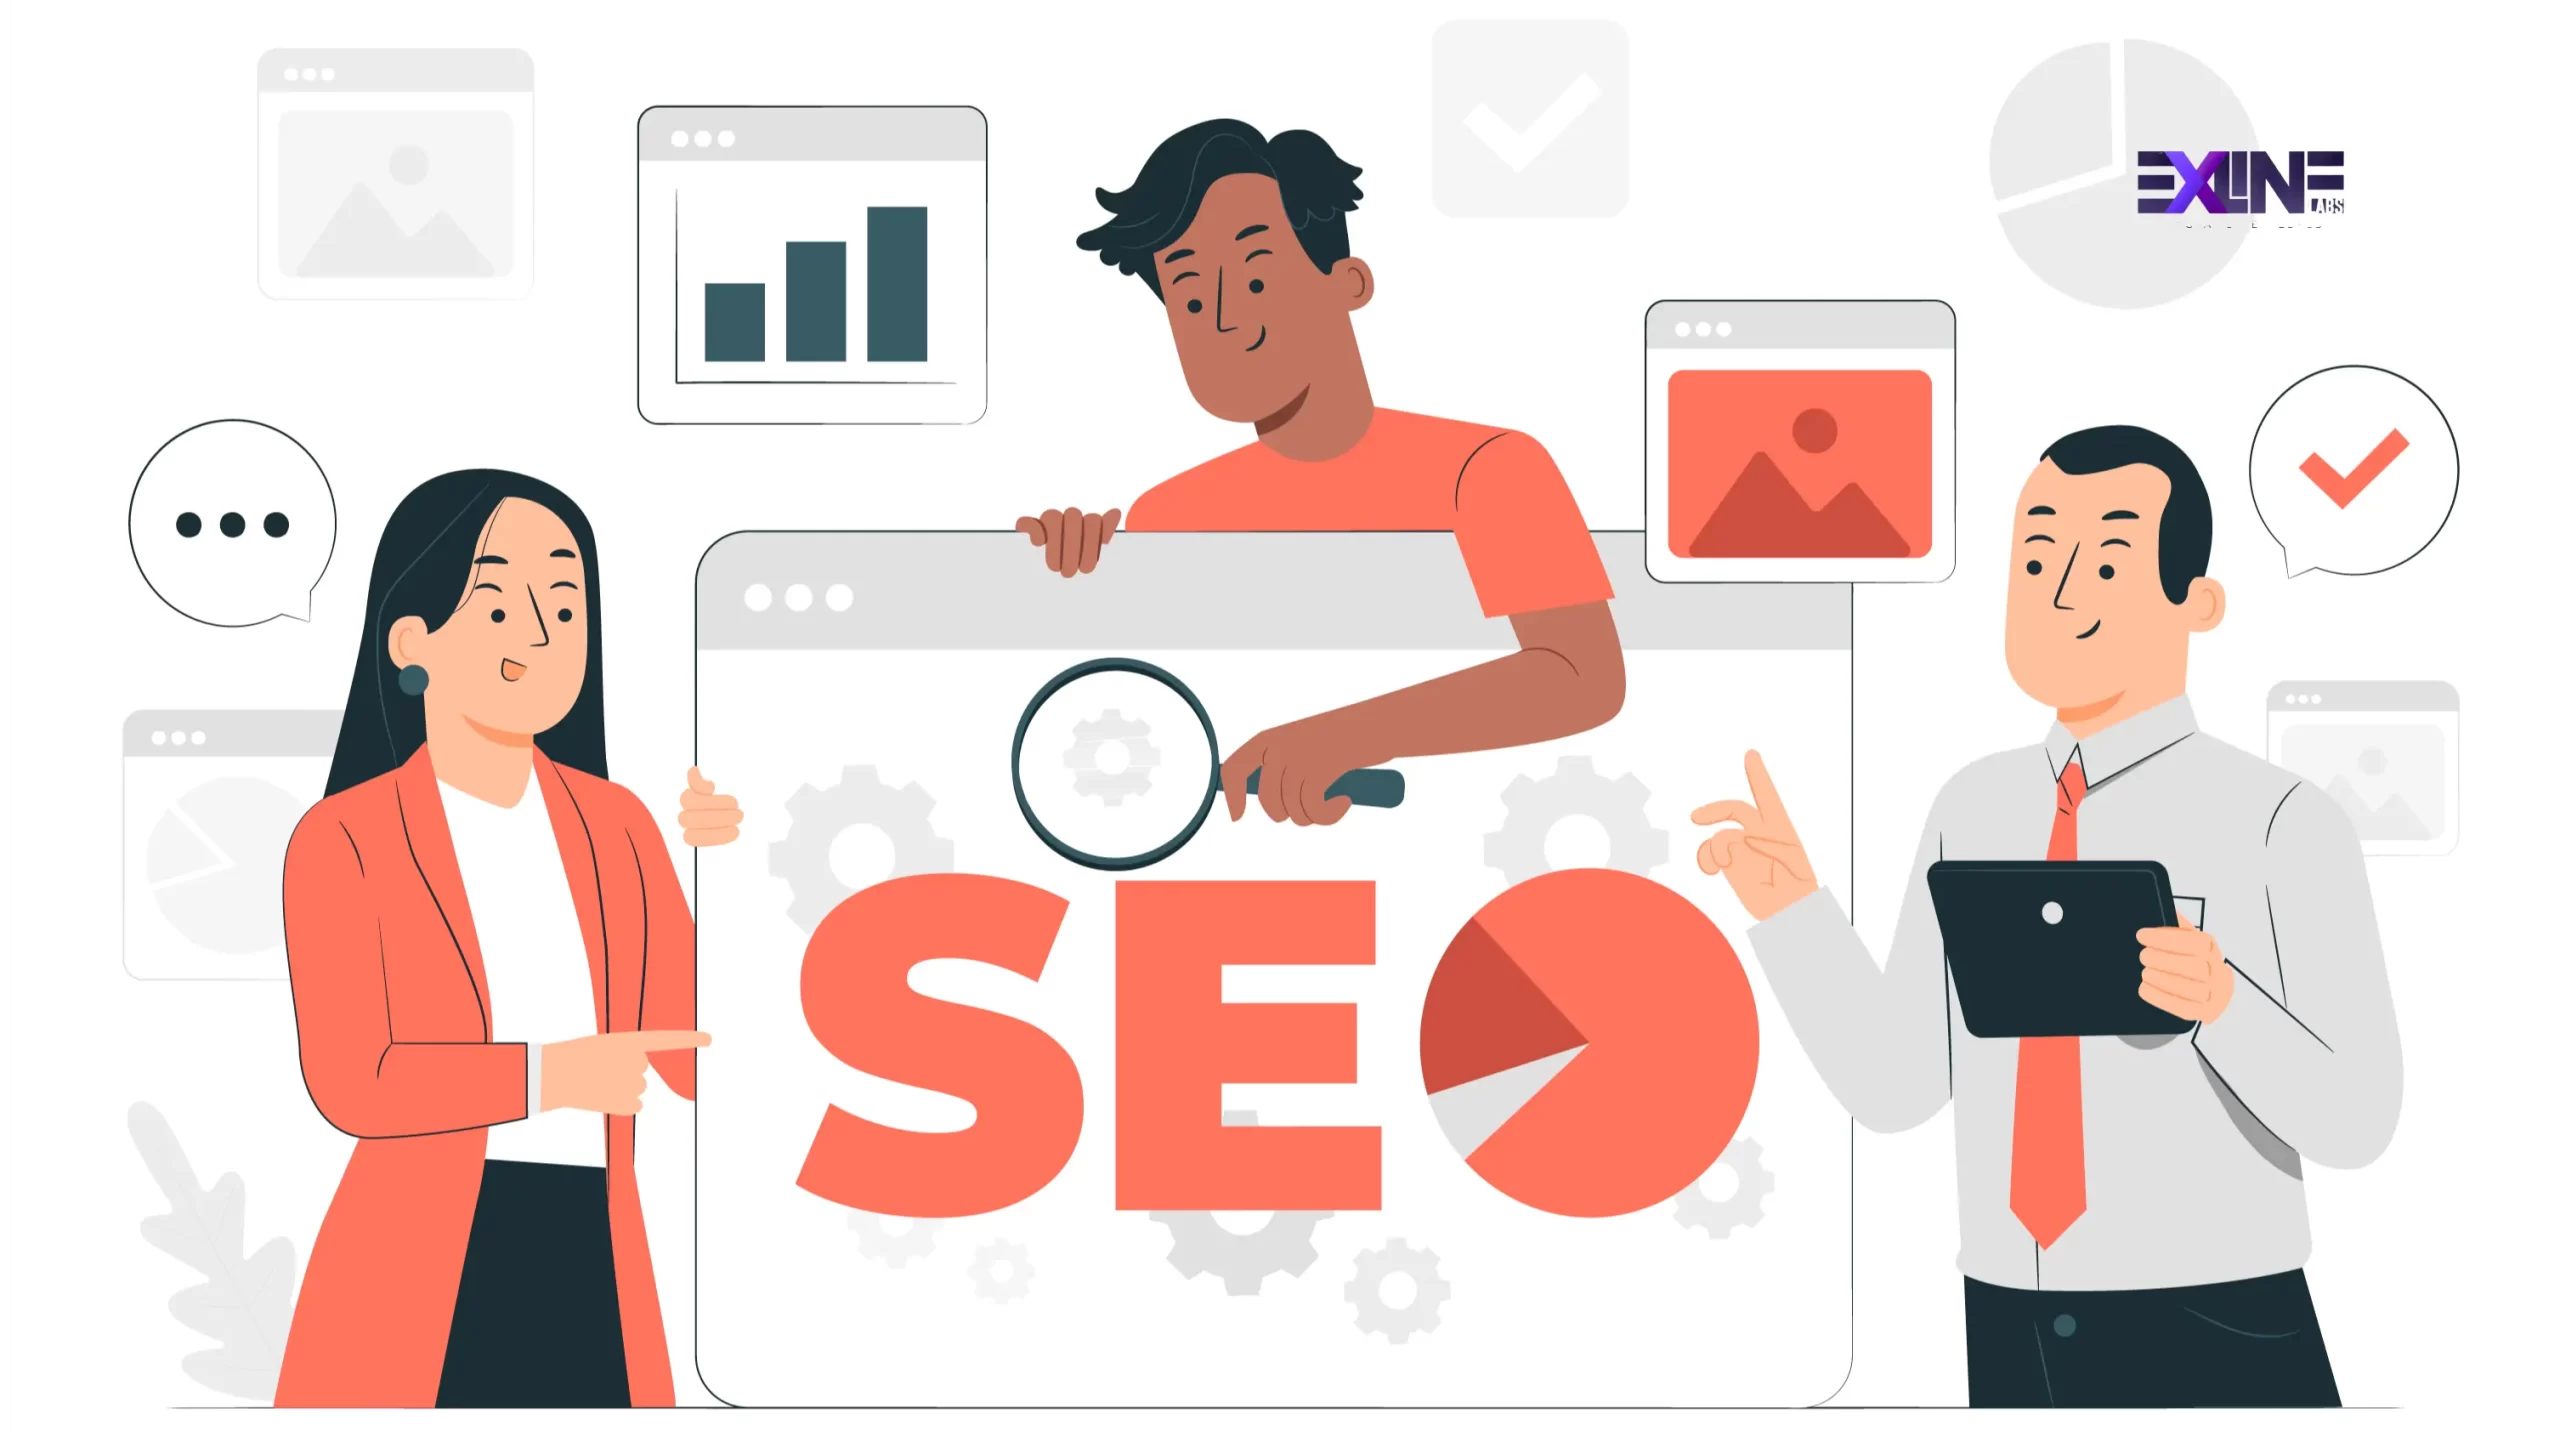 Search Engine Optimization (SEO) for : A Step-by-Step Guide